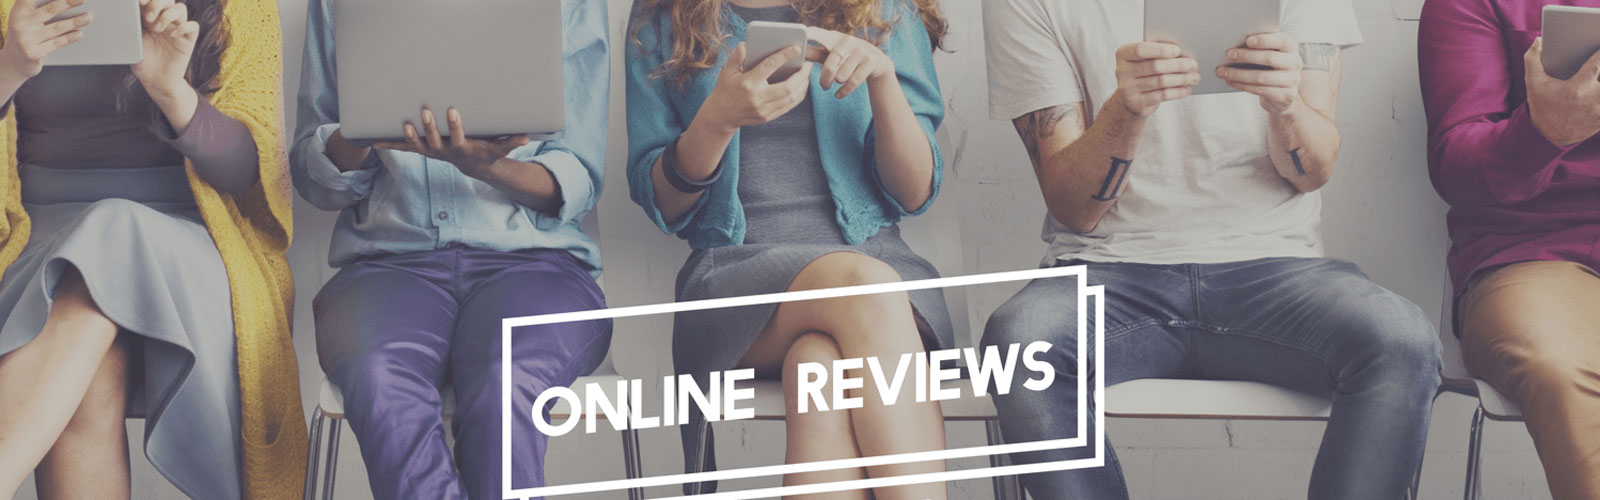 7 Steps to Boost Online Reviews for Your Dental Practice